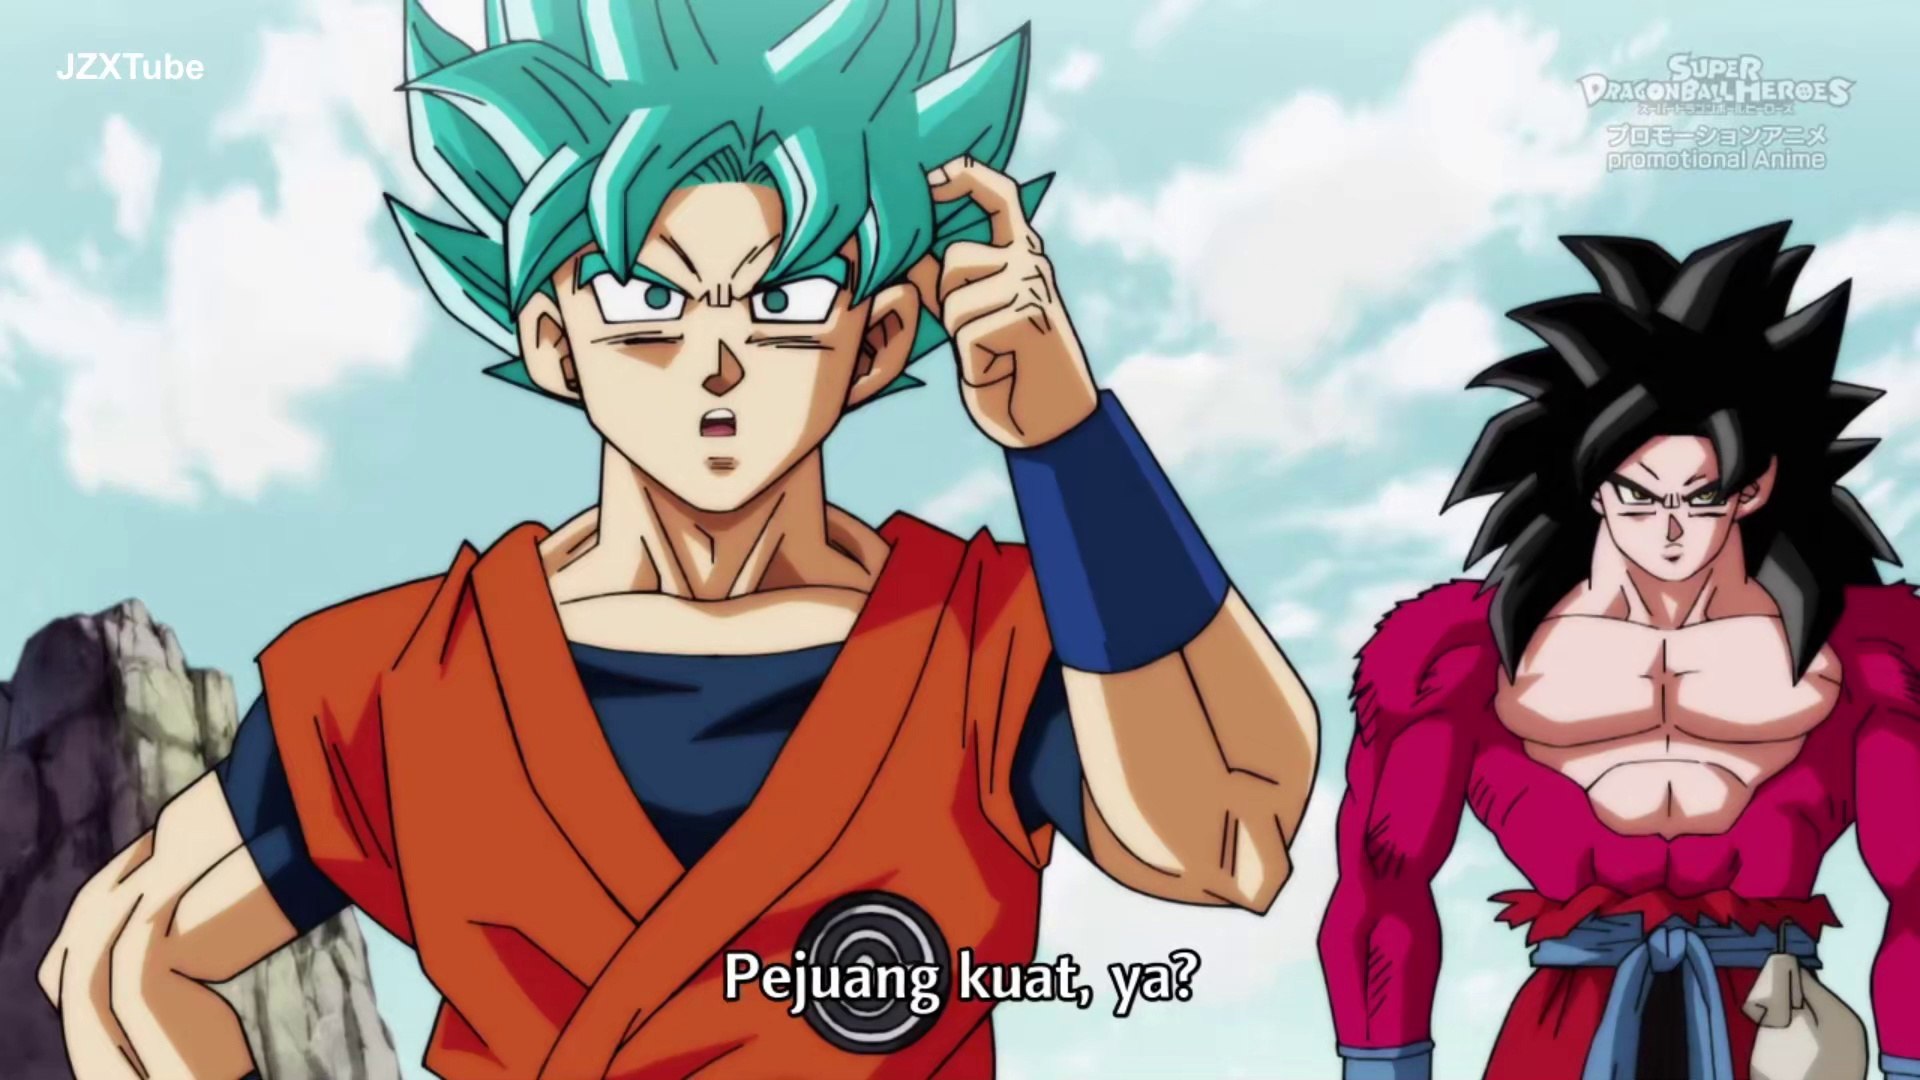 Super Dragon Ball Heroes Episode 41 l Sub Indonesia - video Dailymotion